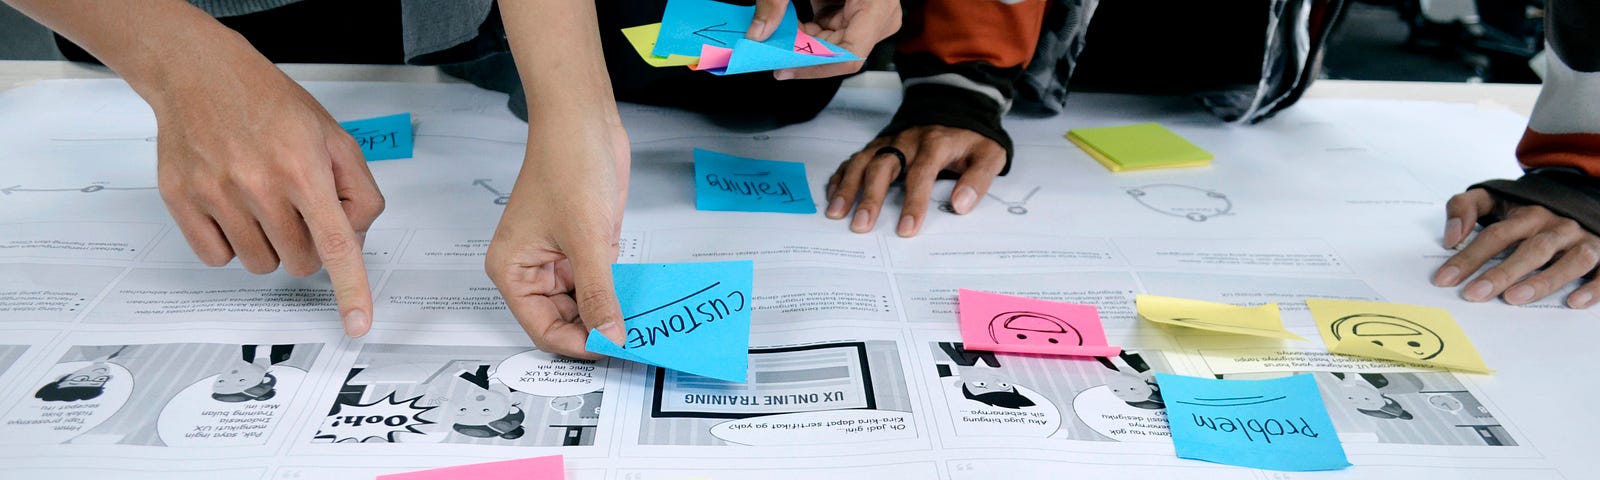 Three pair of hands are putting sticky notes onto notes laid on a table